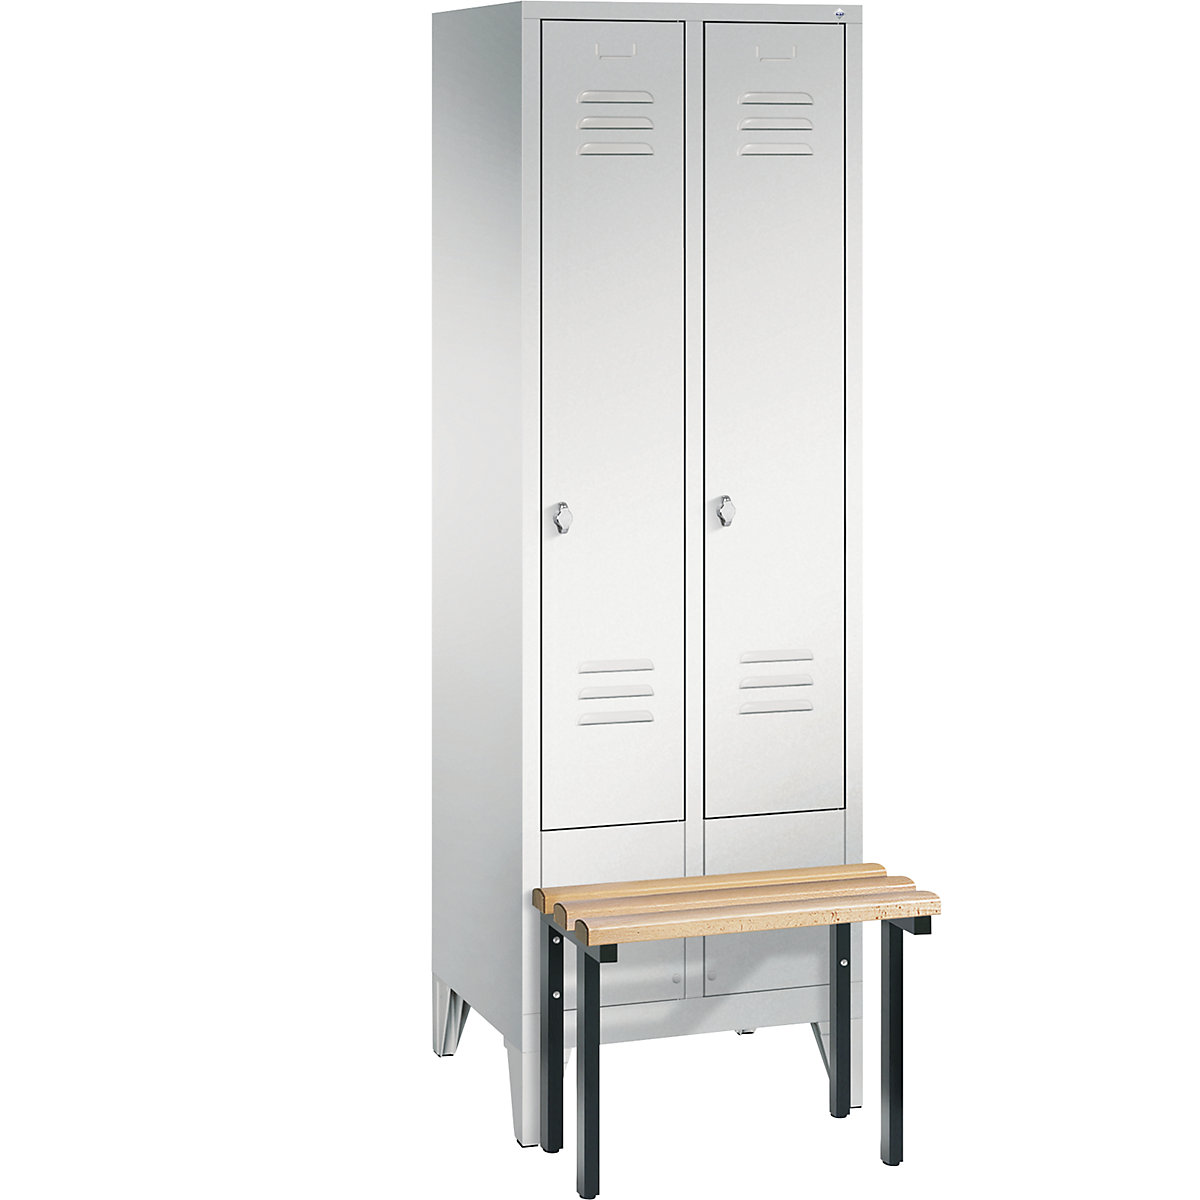 CLASSIC cloakroom locker with bench mounted in front – C+P, 2 compartments, compartment width 300 mm, light grey-4